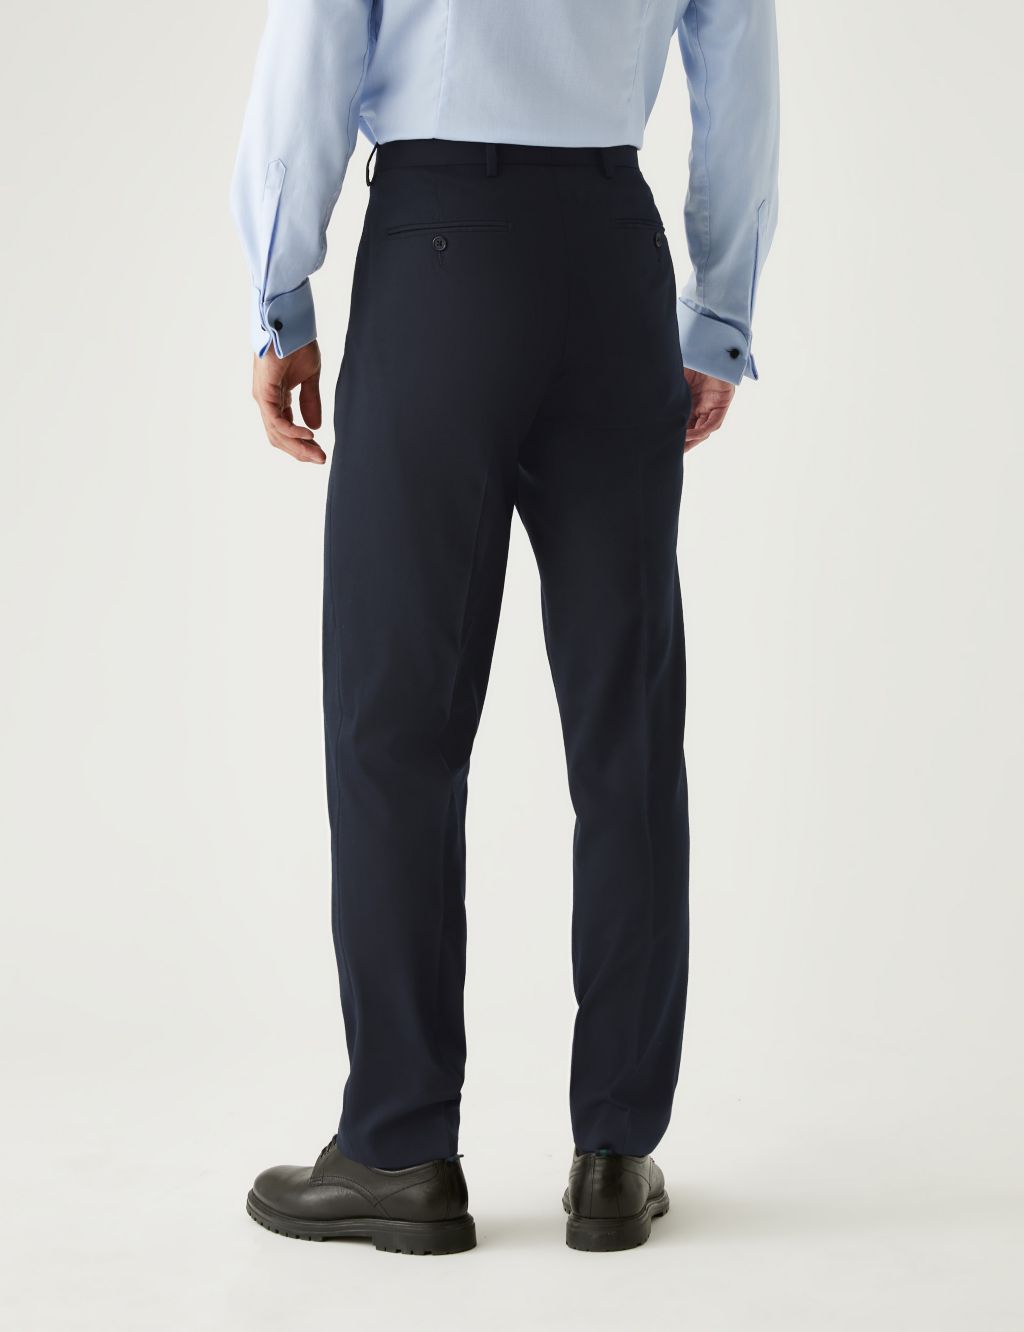 Regular Fit Wool Blend Flat Front Trousers image 4